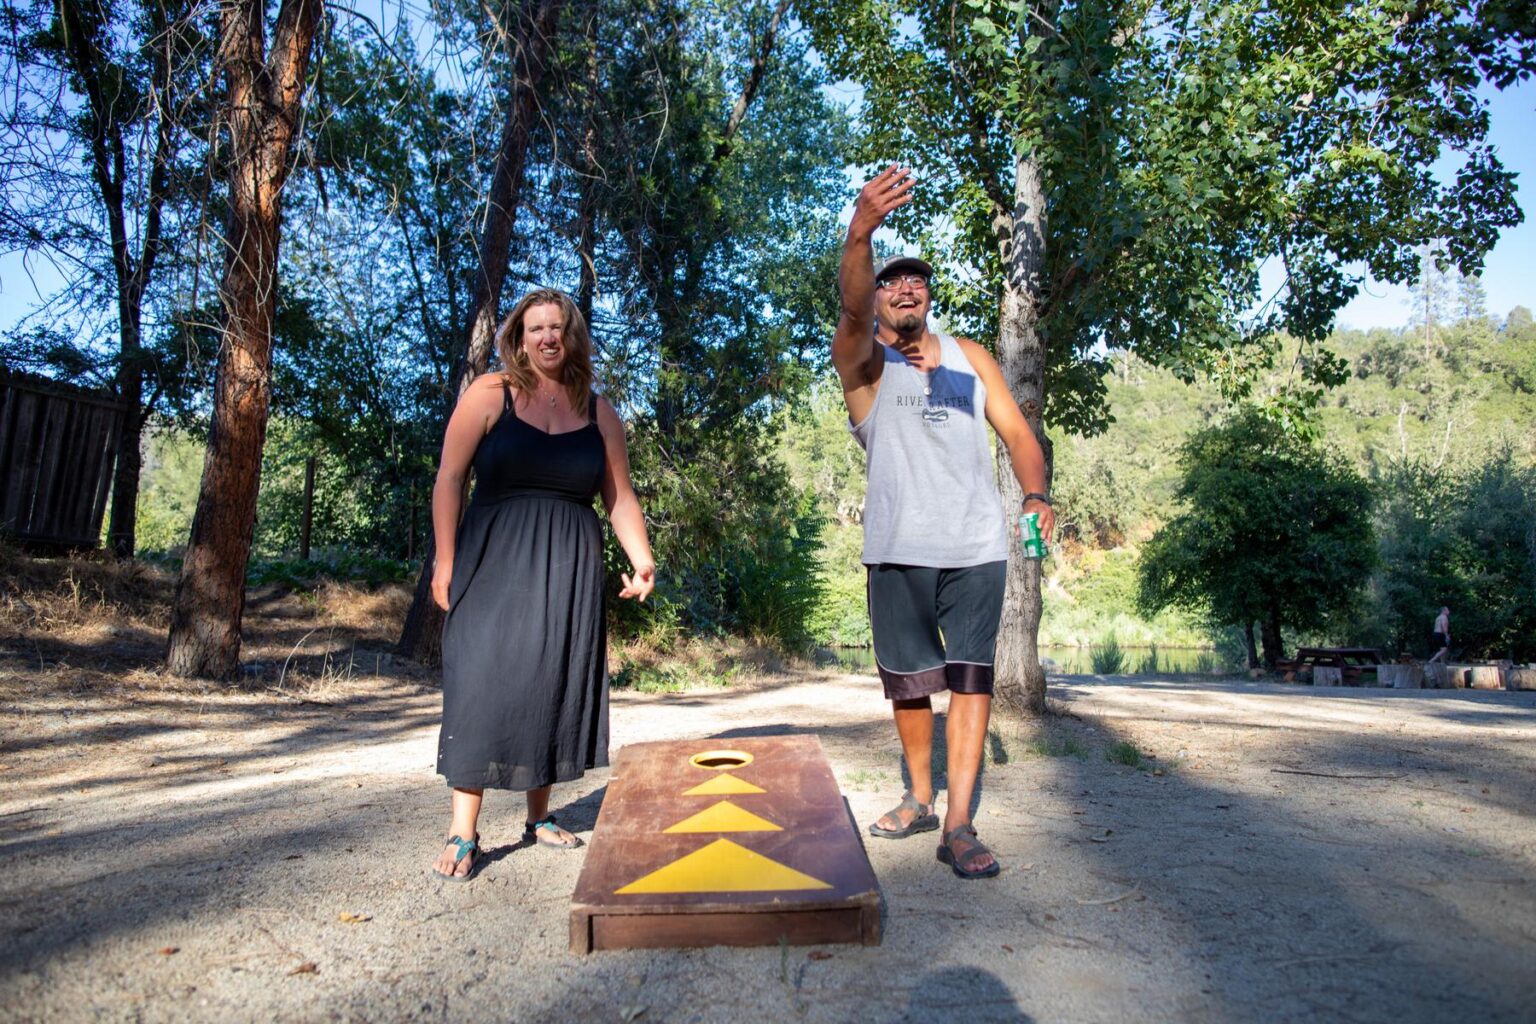 A couple plays cornhole amongst the trees at the OARS at EarthTrek campground.